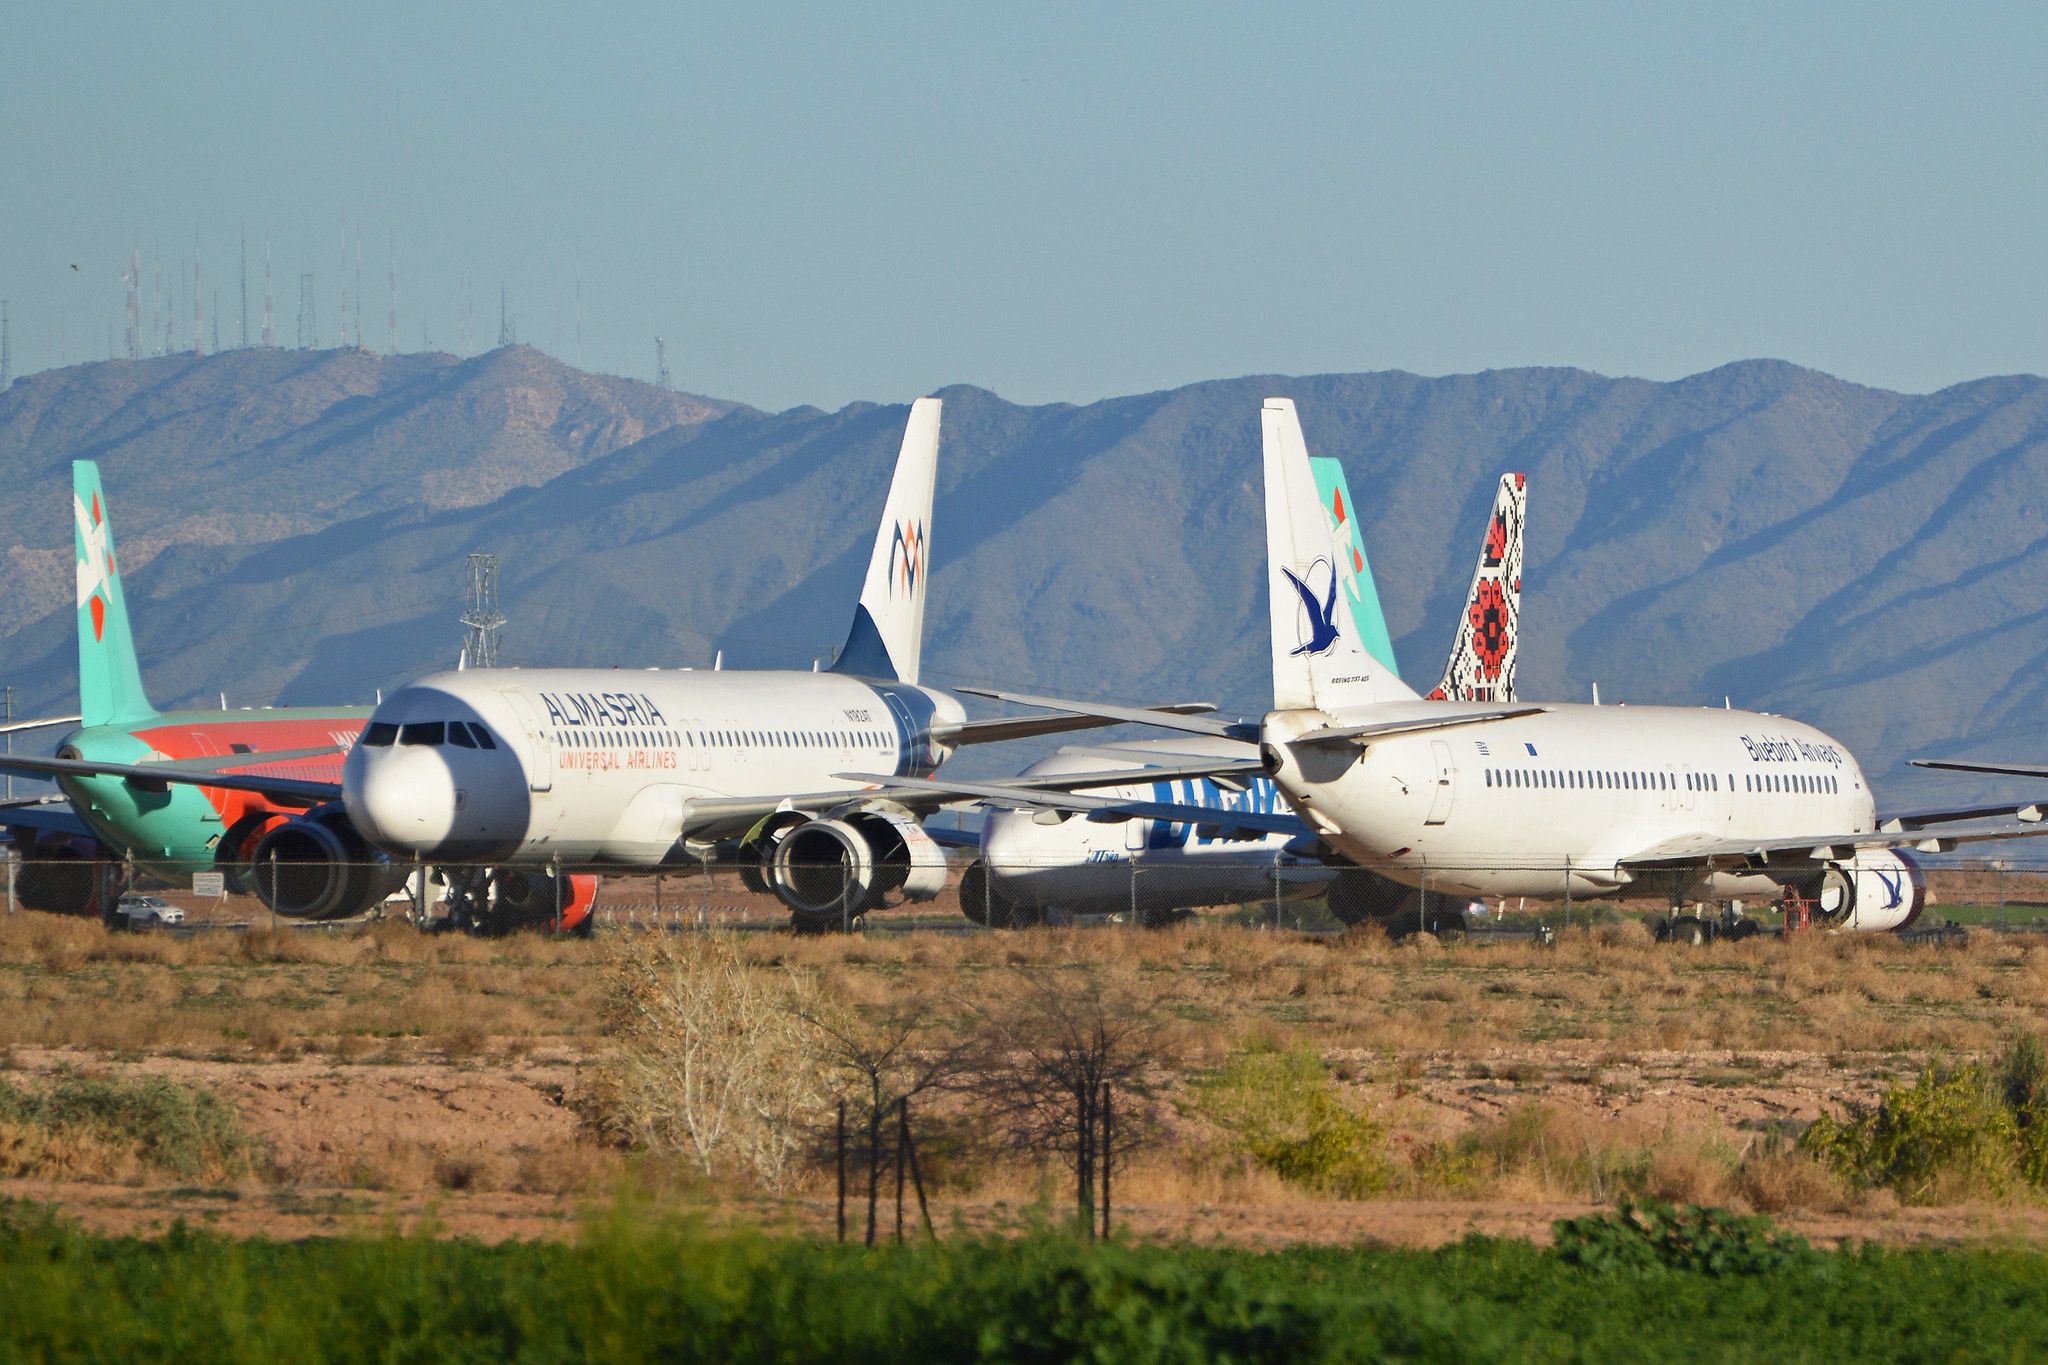 A line of stored airliners at Goodyear, Arizona